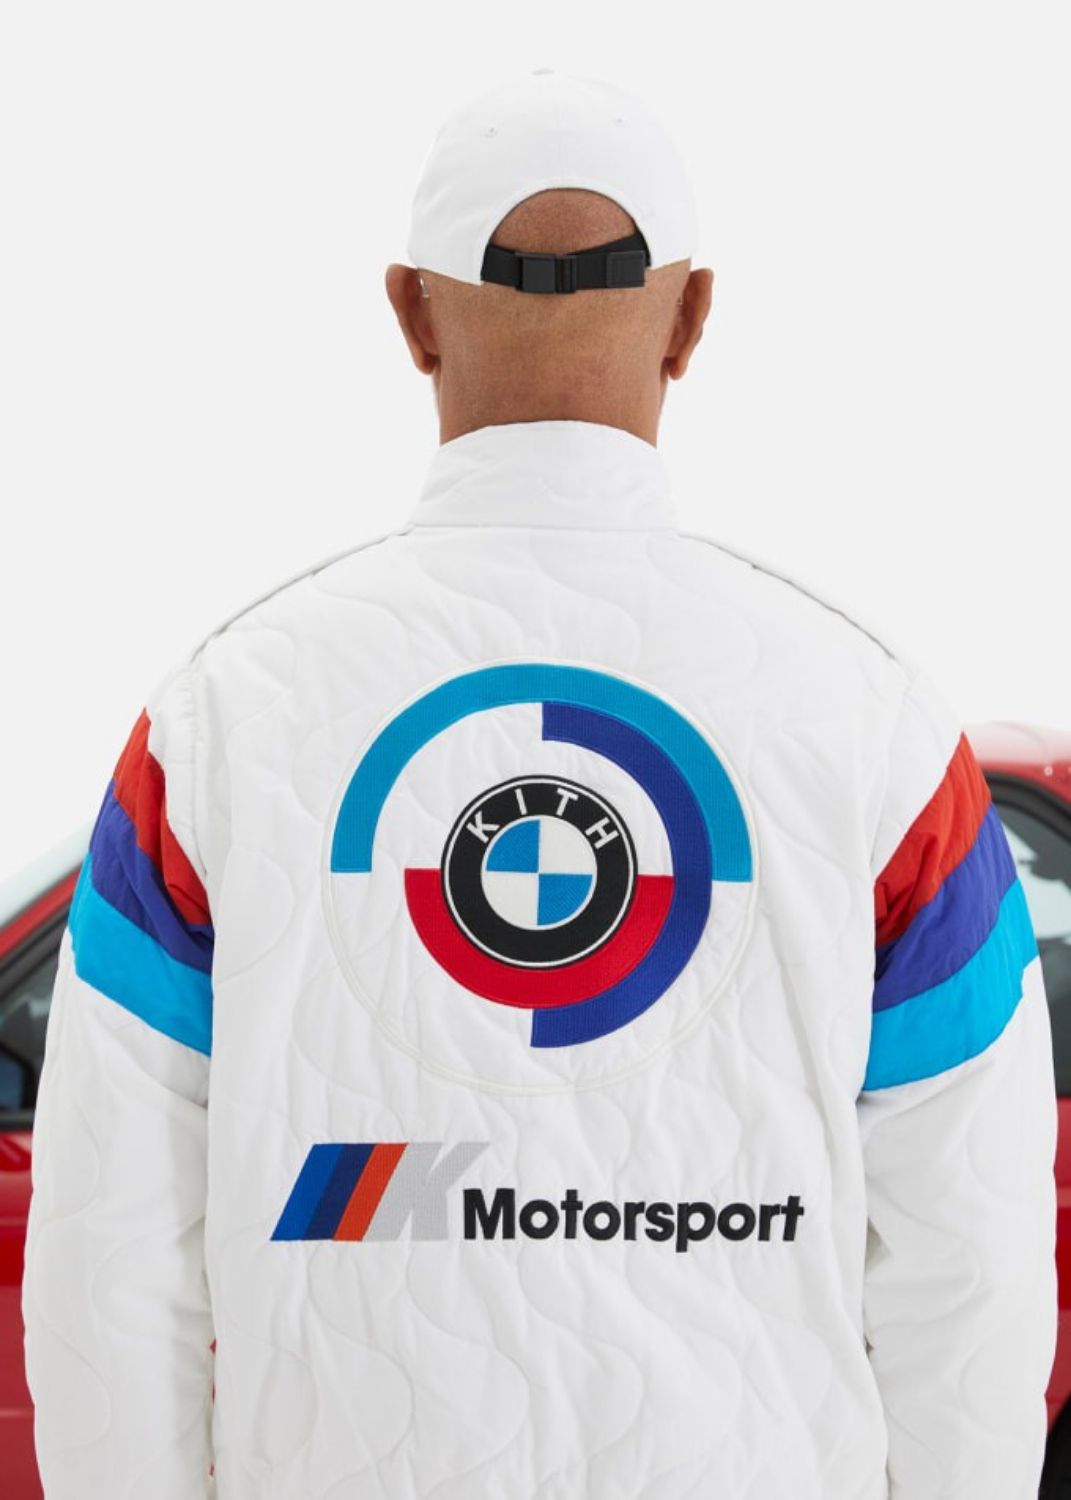 The Kith x BMW collaboration couples streetwear and the need for speed